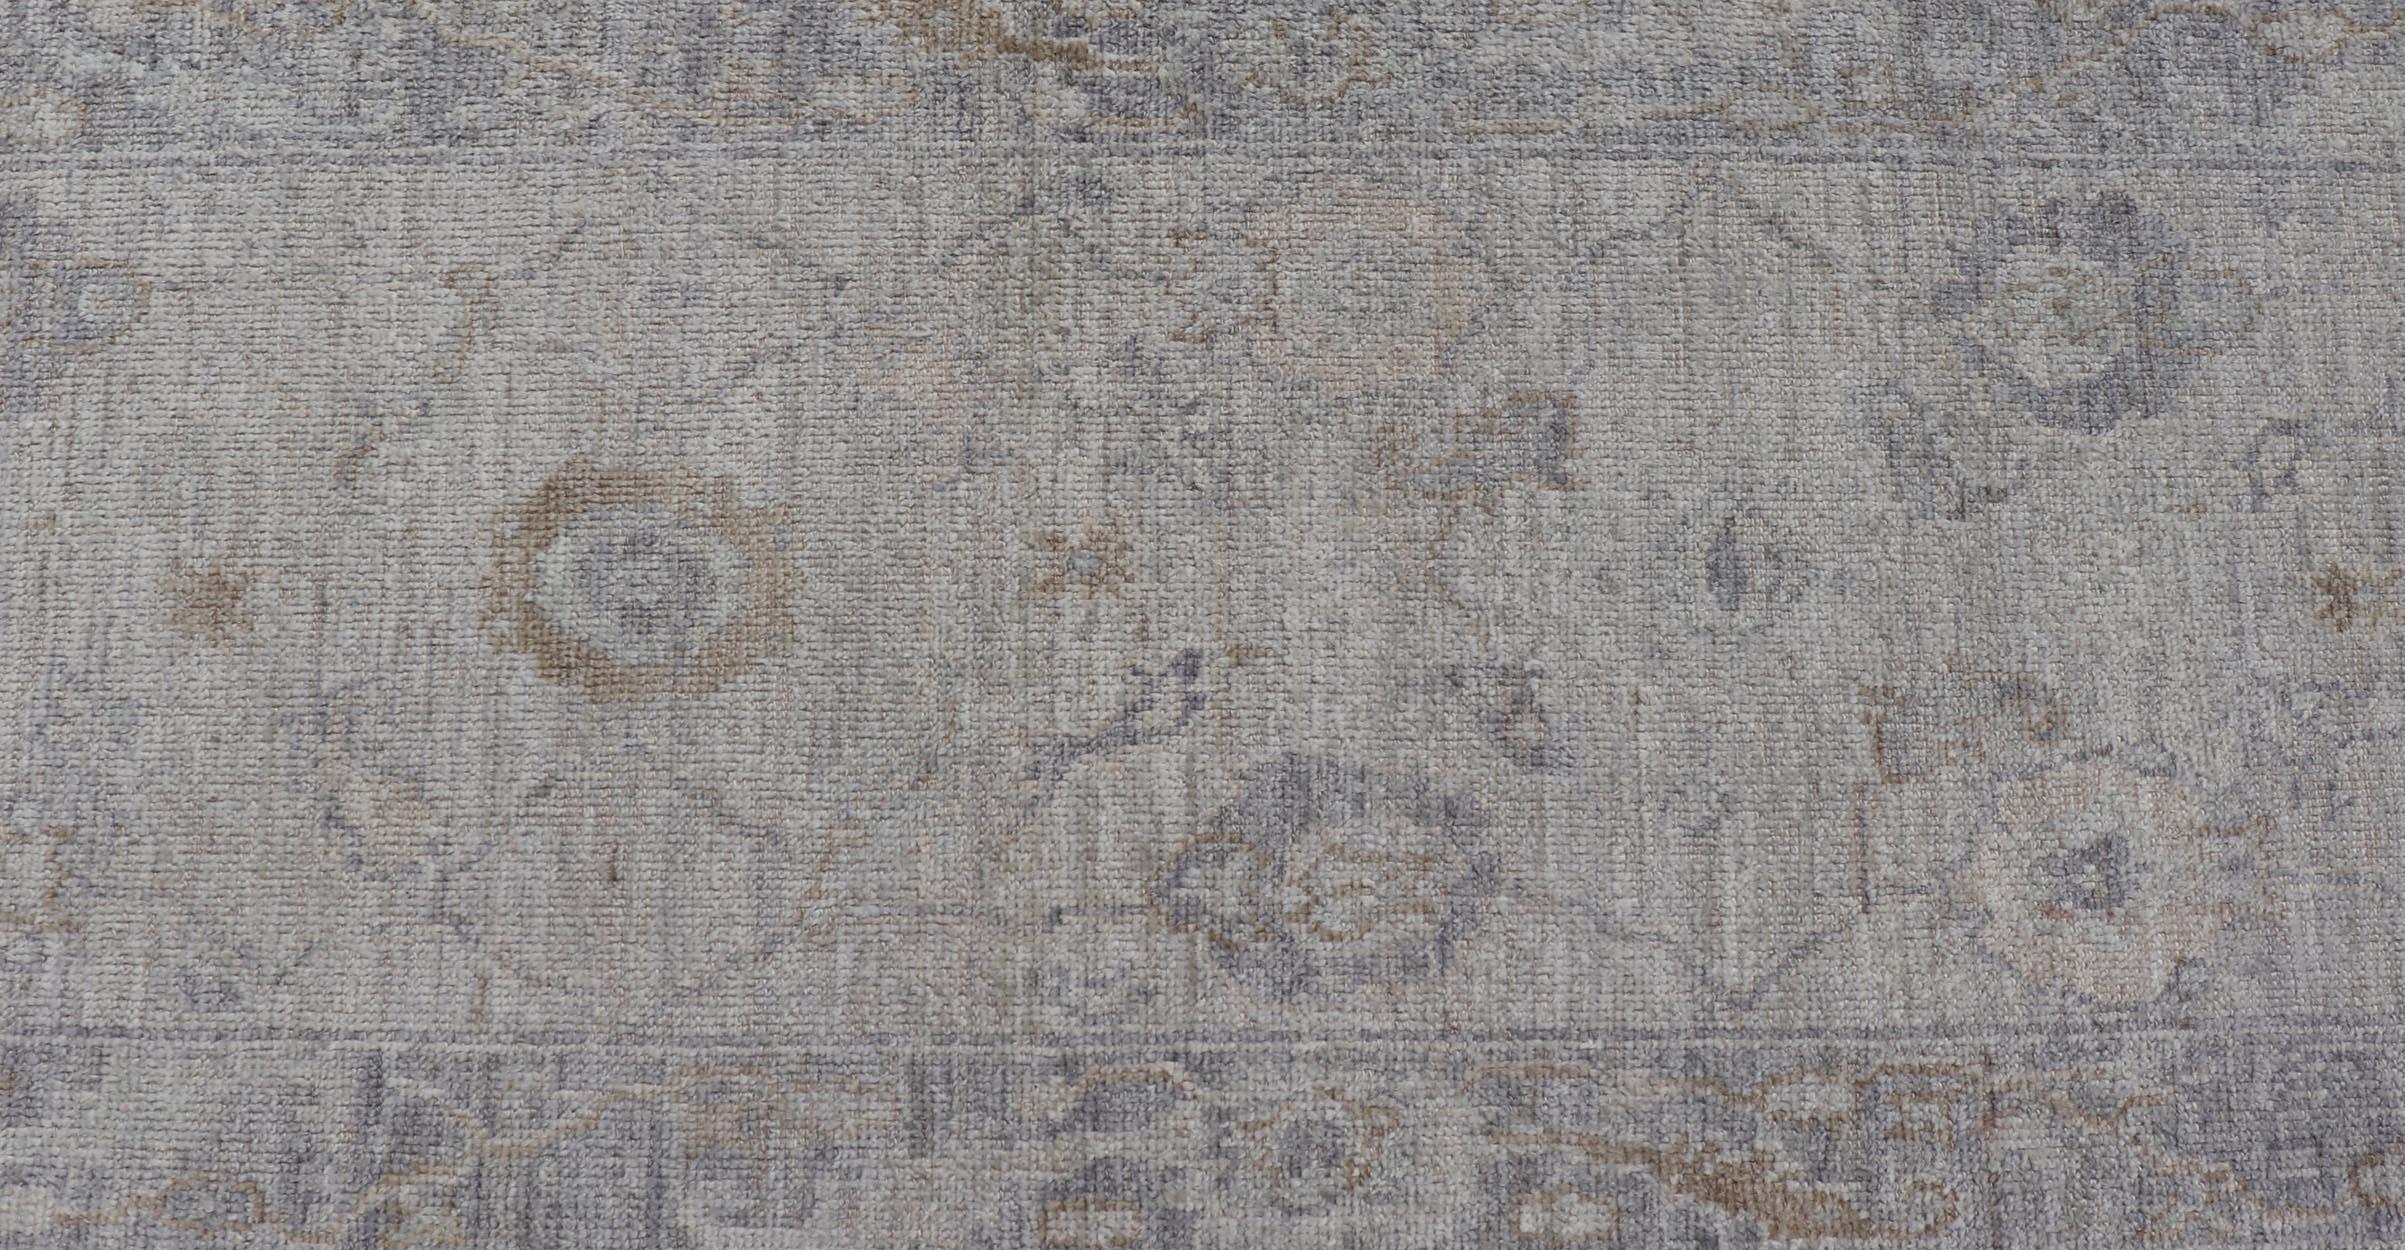 Angora Oushak Turkish Rug in Cream, Silver, Gray, and Shades of Light Grey 1